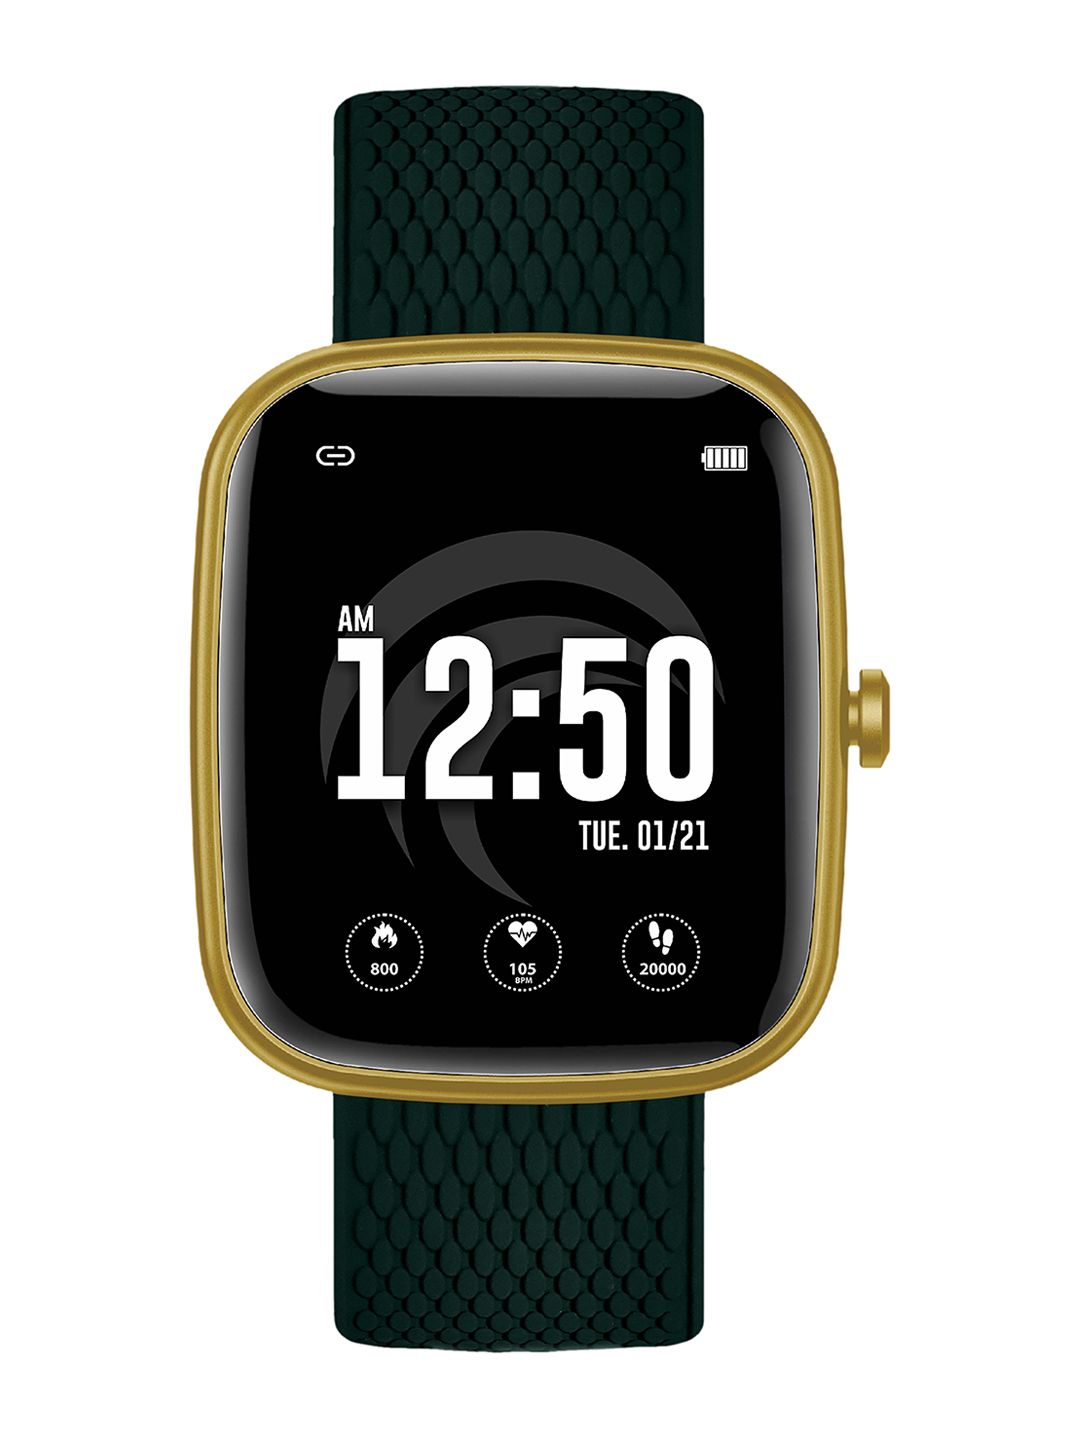 Cellecor Black & Gold Toned Solid ActFit A4 Waterproof Smartwatch Price in India